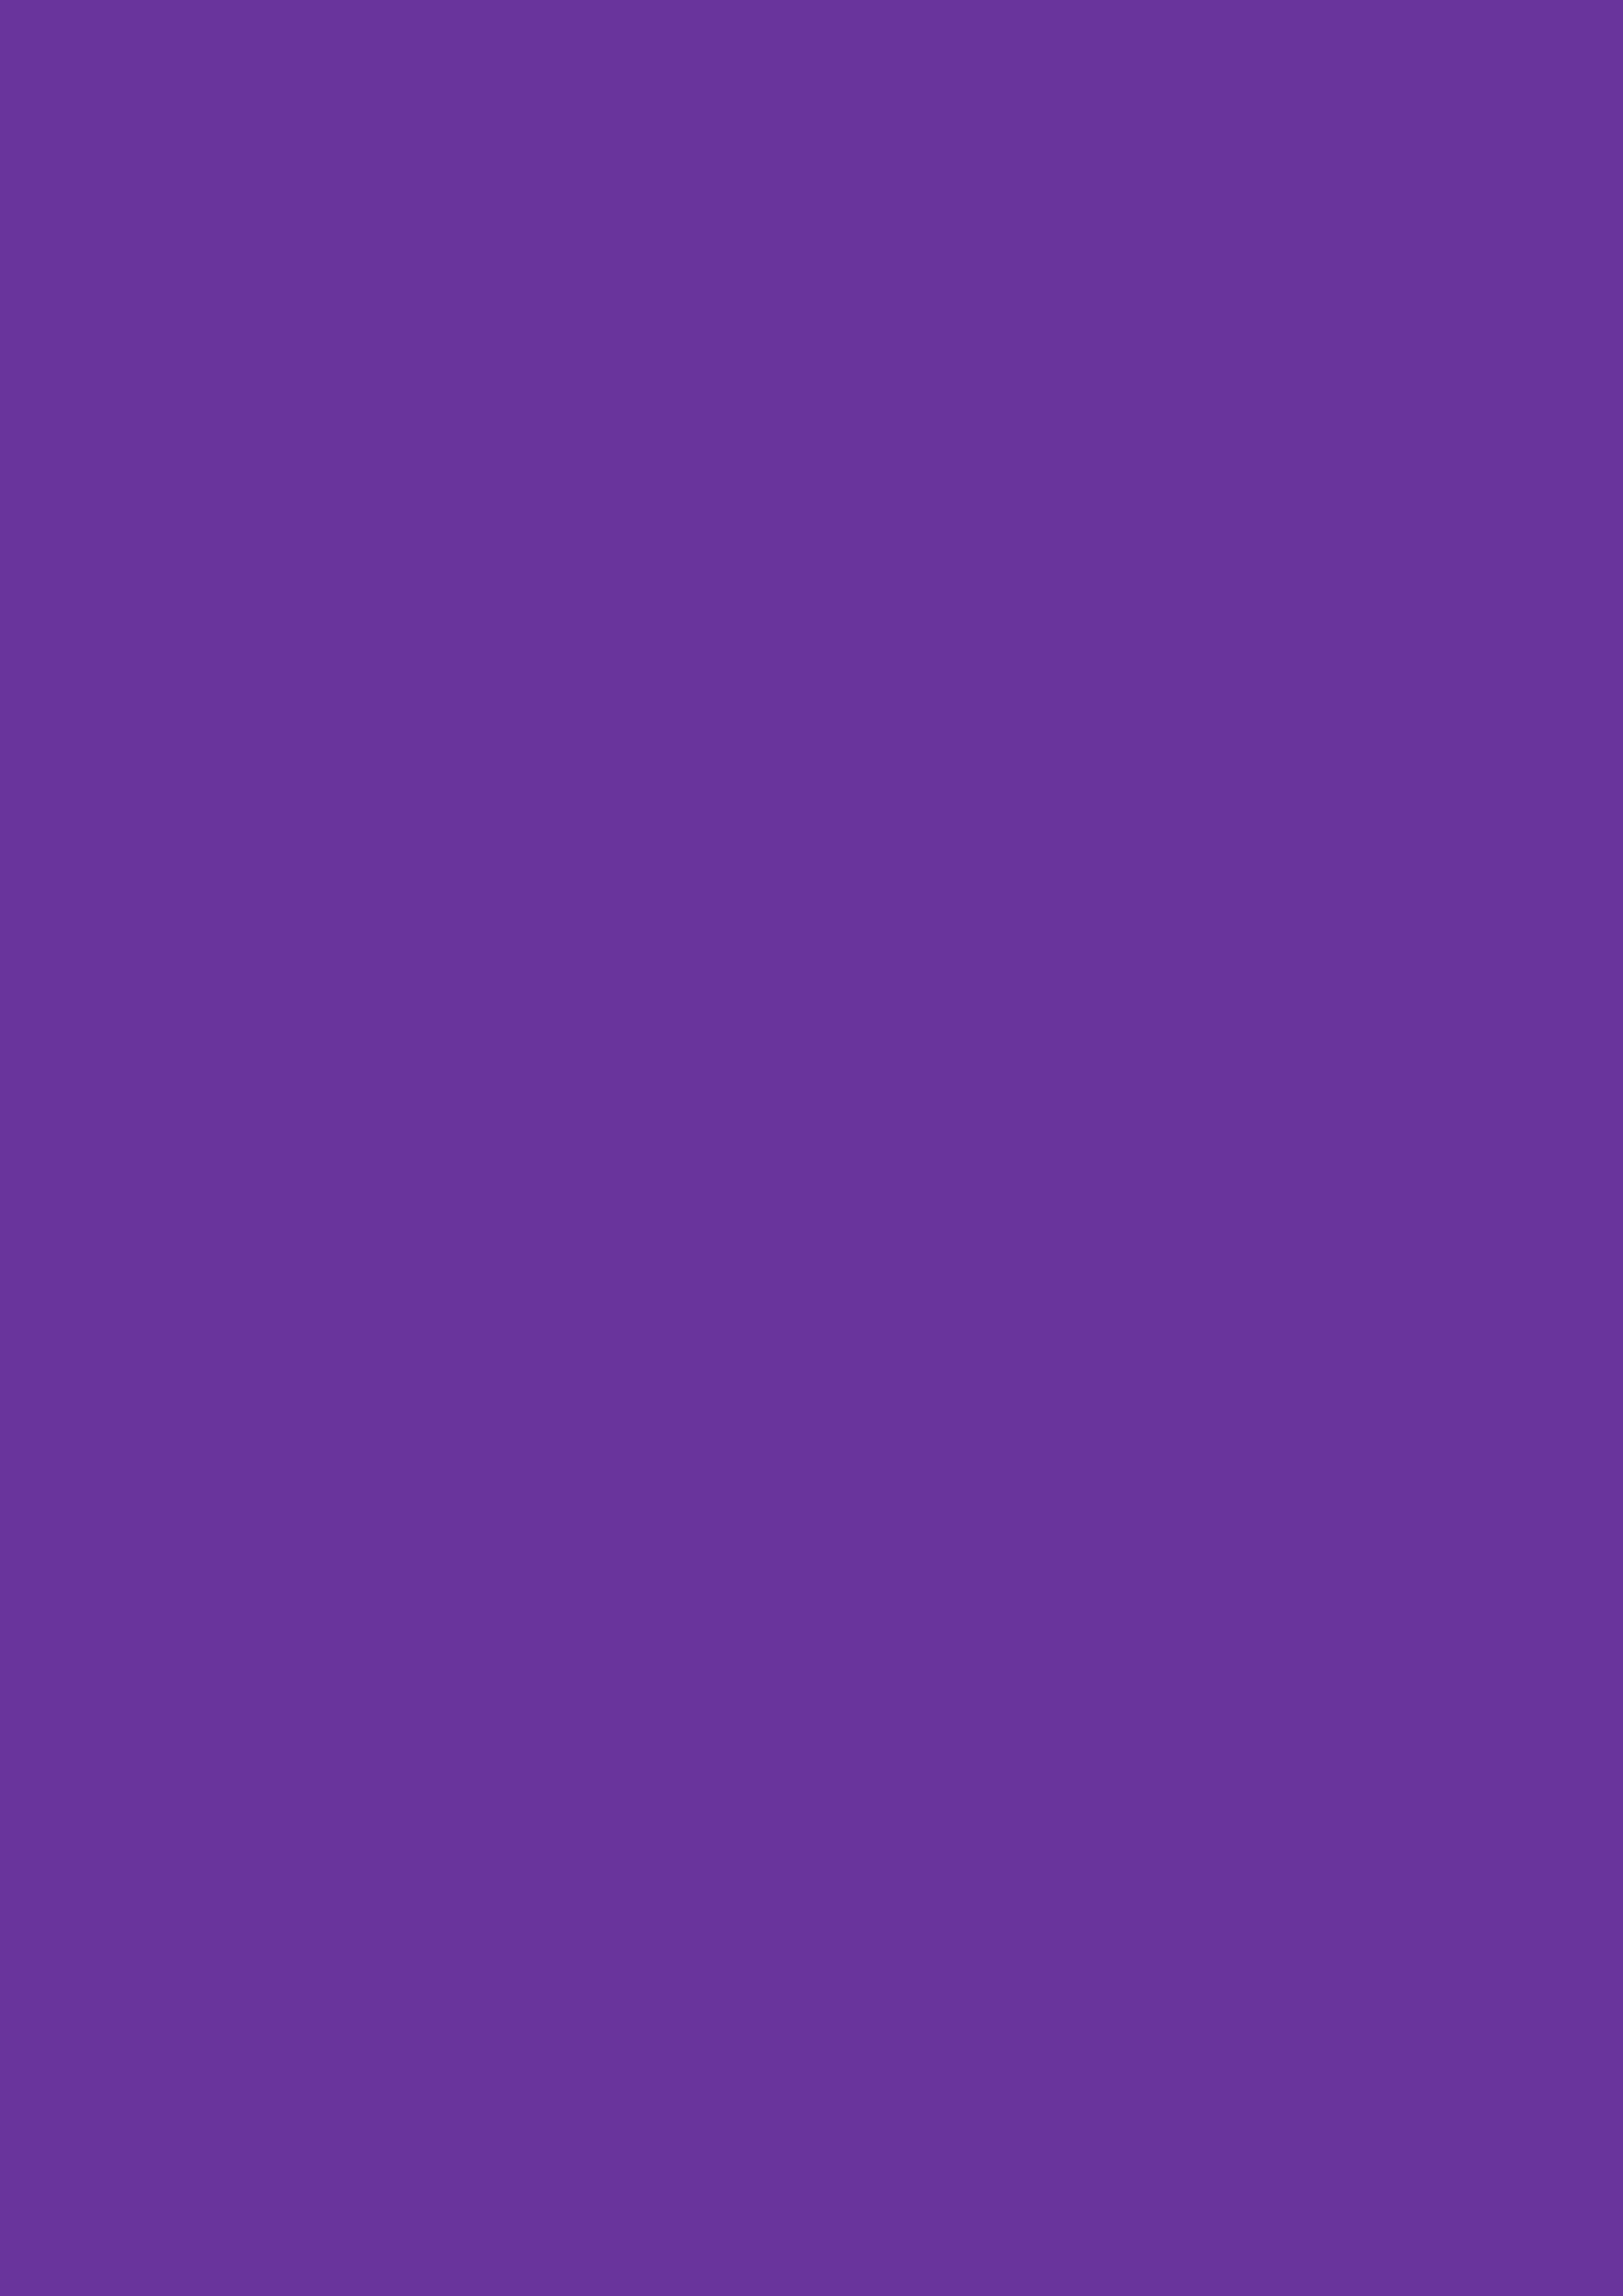 2480x3508 Purple Heart Solid Color Background